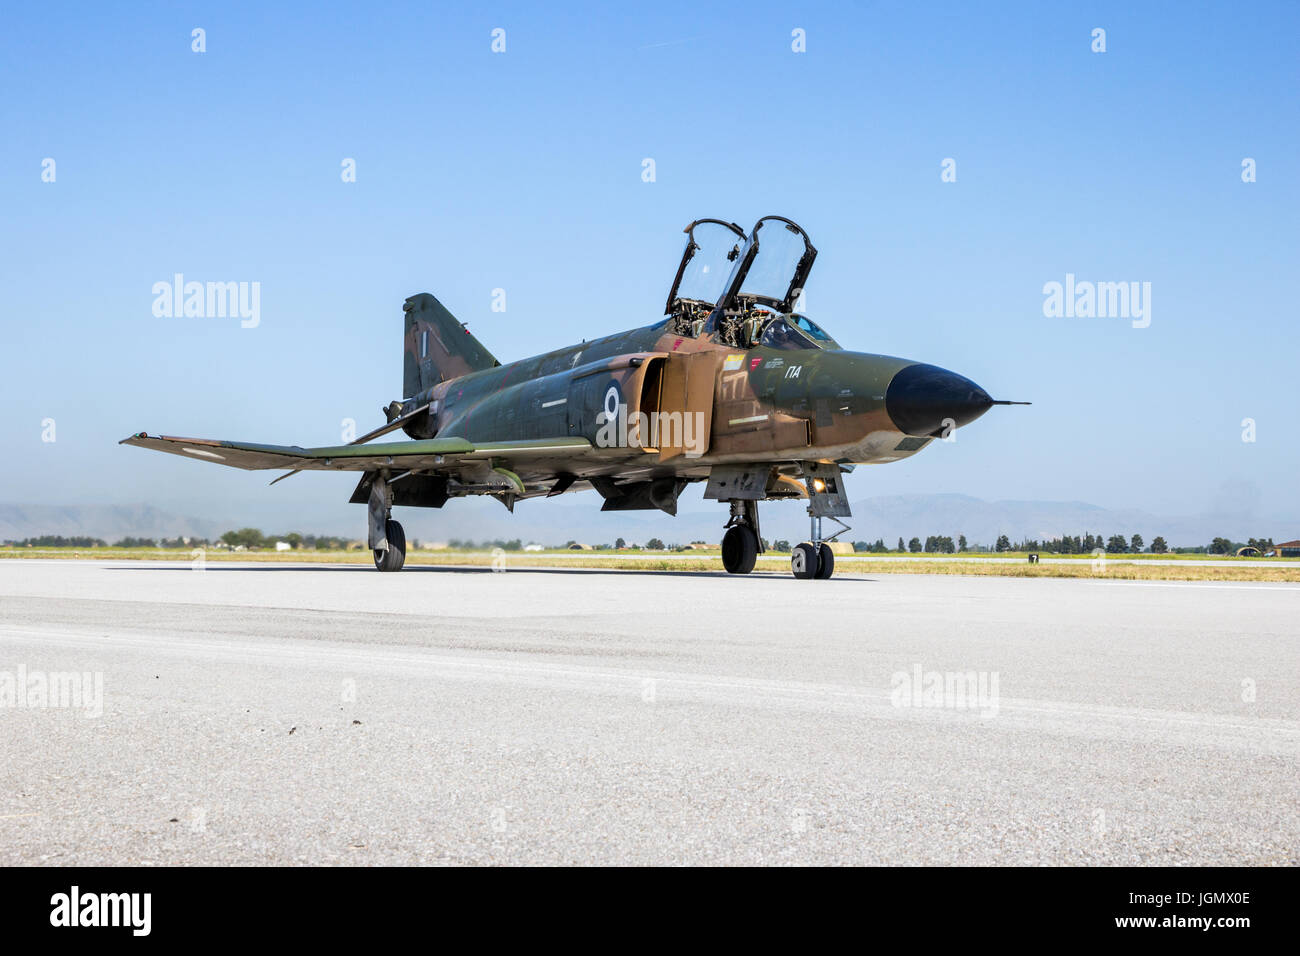 LARISSA, GREECE - MAY 4, 2017: Hellenic Air Force RF-4E Phantom II fighter jet plane taxiing after one of its last flights. 348 Reconnaissance Squadro Stock Photo